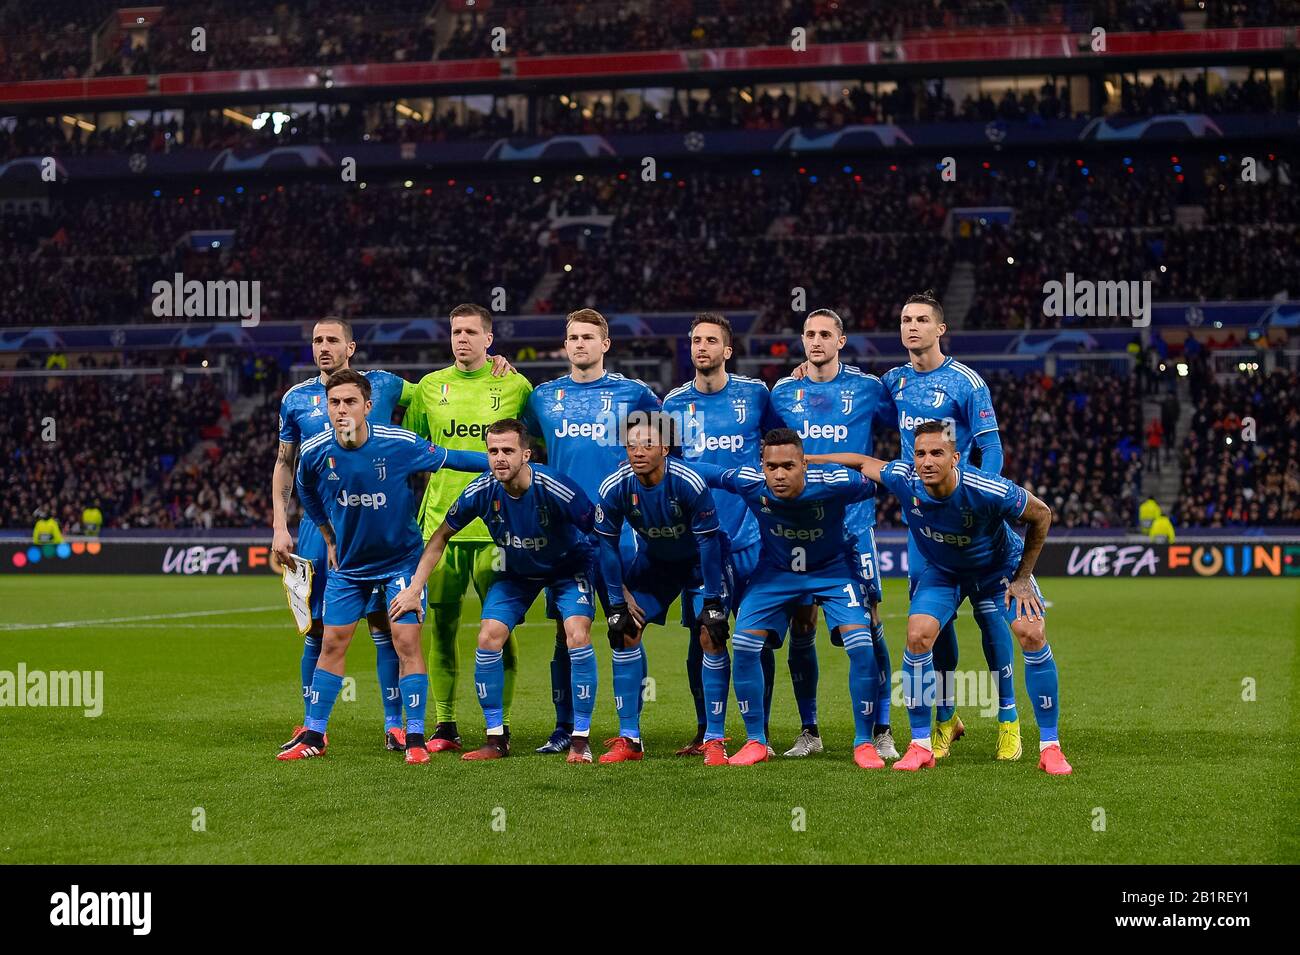 Lyon, Italy. 26th Feb, 2020. LYON, ITALY - February 26, 2020: Players of Jvuentus FC pose for a team photo prior to the UEFA Champions League round of 16 first leg football match between Olympique Lyonnais and Juventus FC. Olympique Lyonnais won 1-0 over Juventus FC. (Photo by Nicolò Campo/Sipa USA) Credit: Sipa USA/Alamy Live News Stock Photo